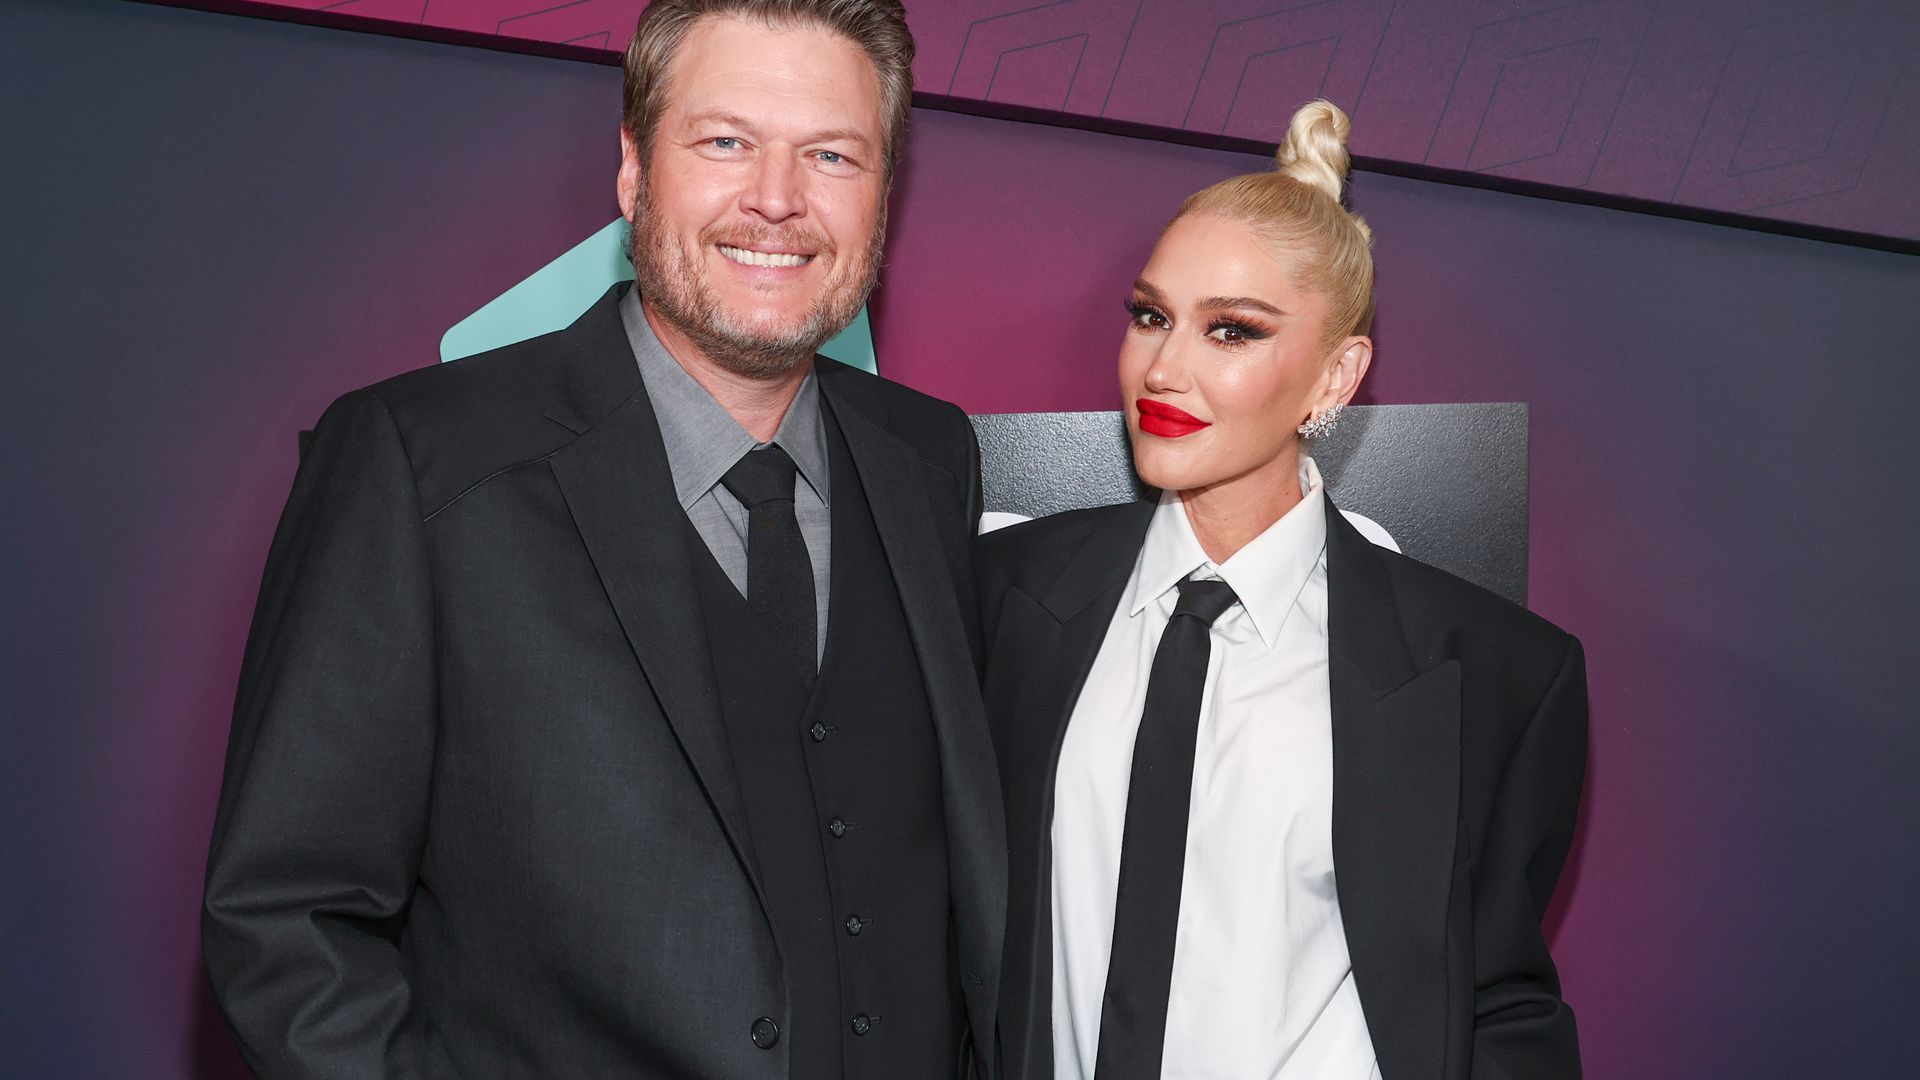 Blake Shelton and Gwen Stefani at the 2023 CMT Music Awards held at Moody Center on April 2, 2023 in Austin, Texas. (Photo by Christopher Polk/Variety via Getty Images)